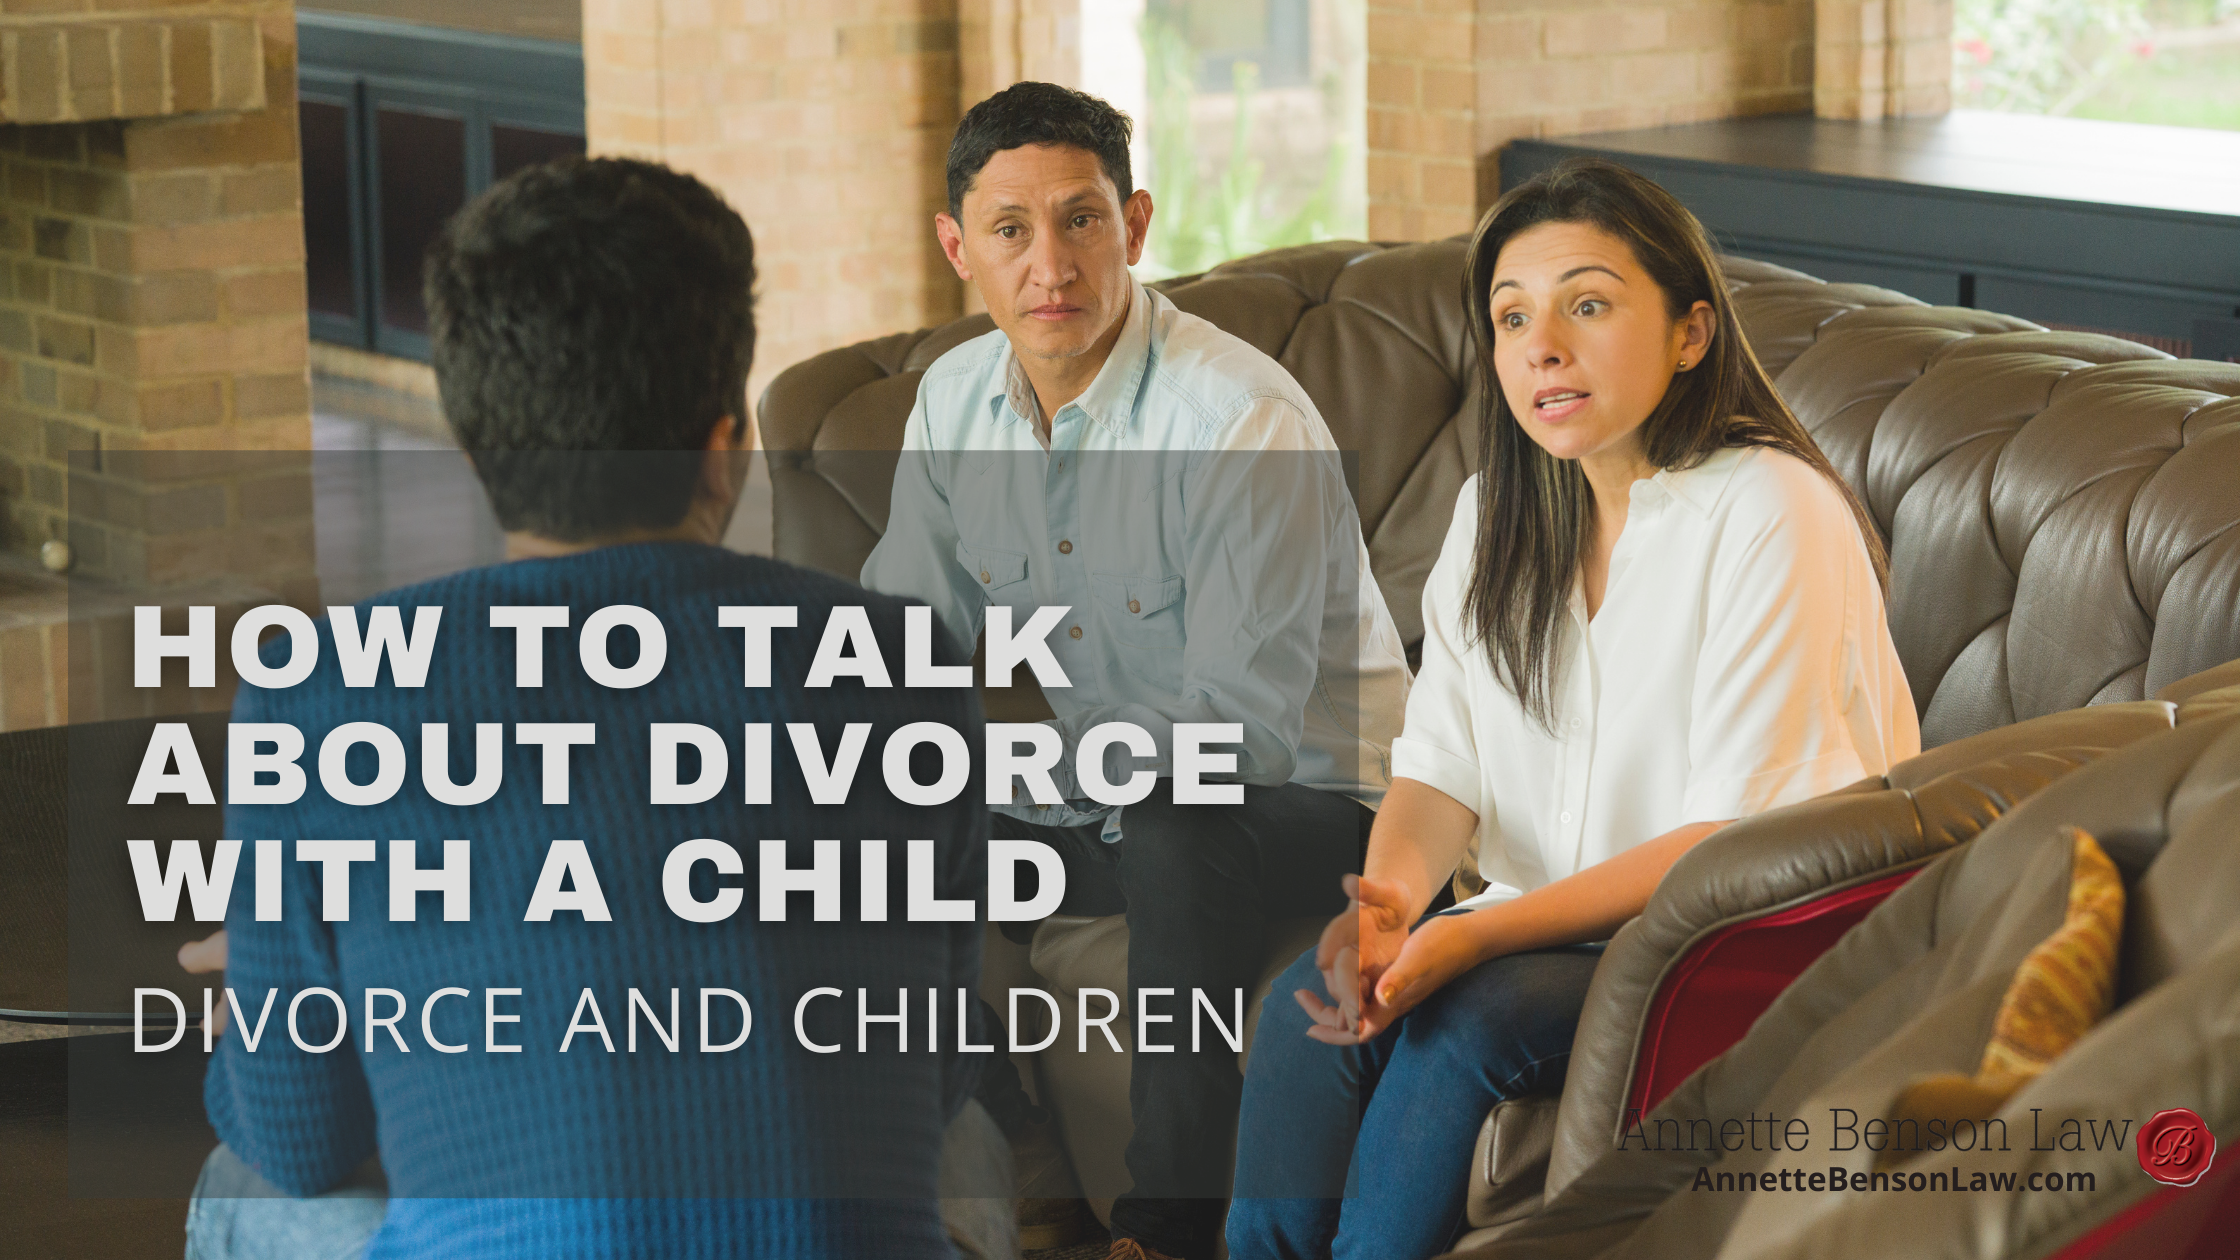 How to talk about divorce with a child